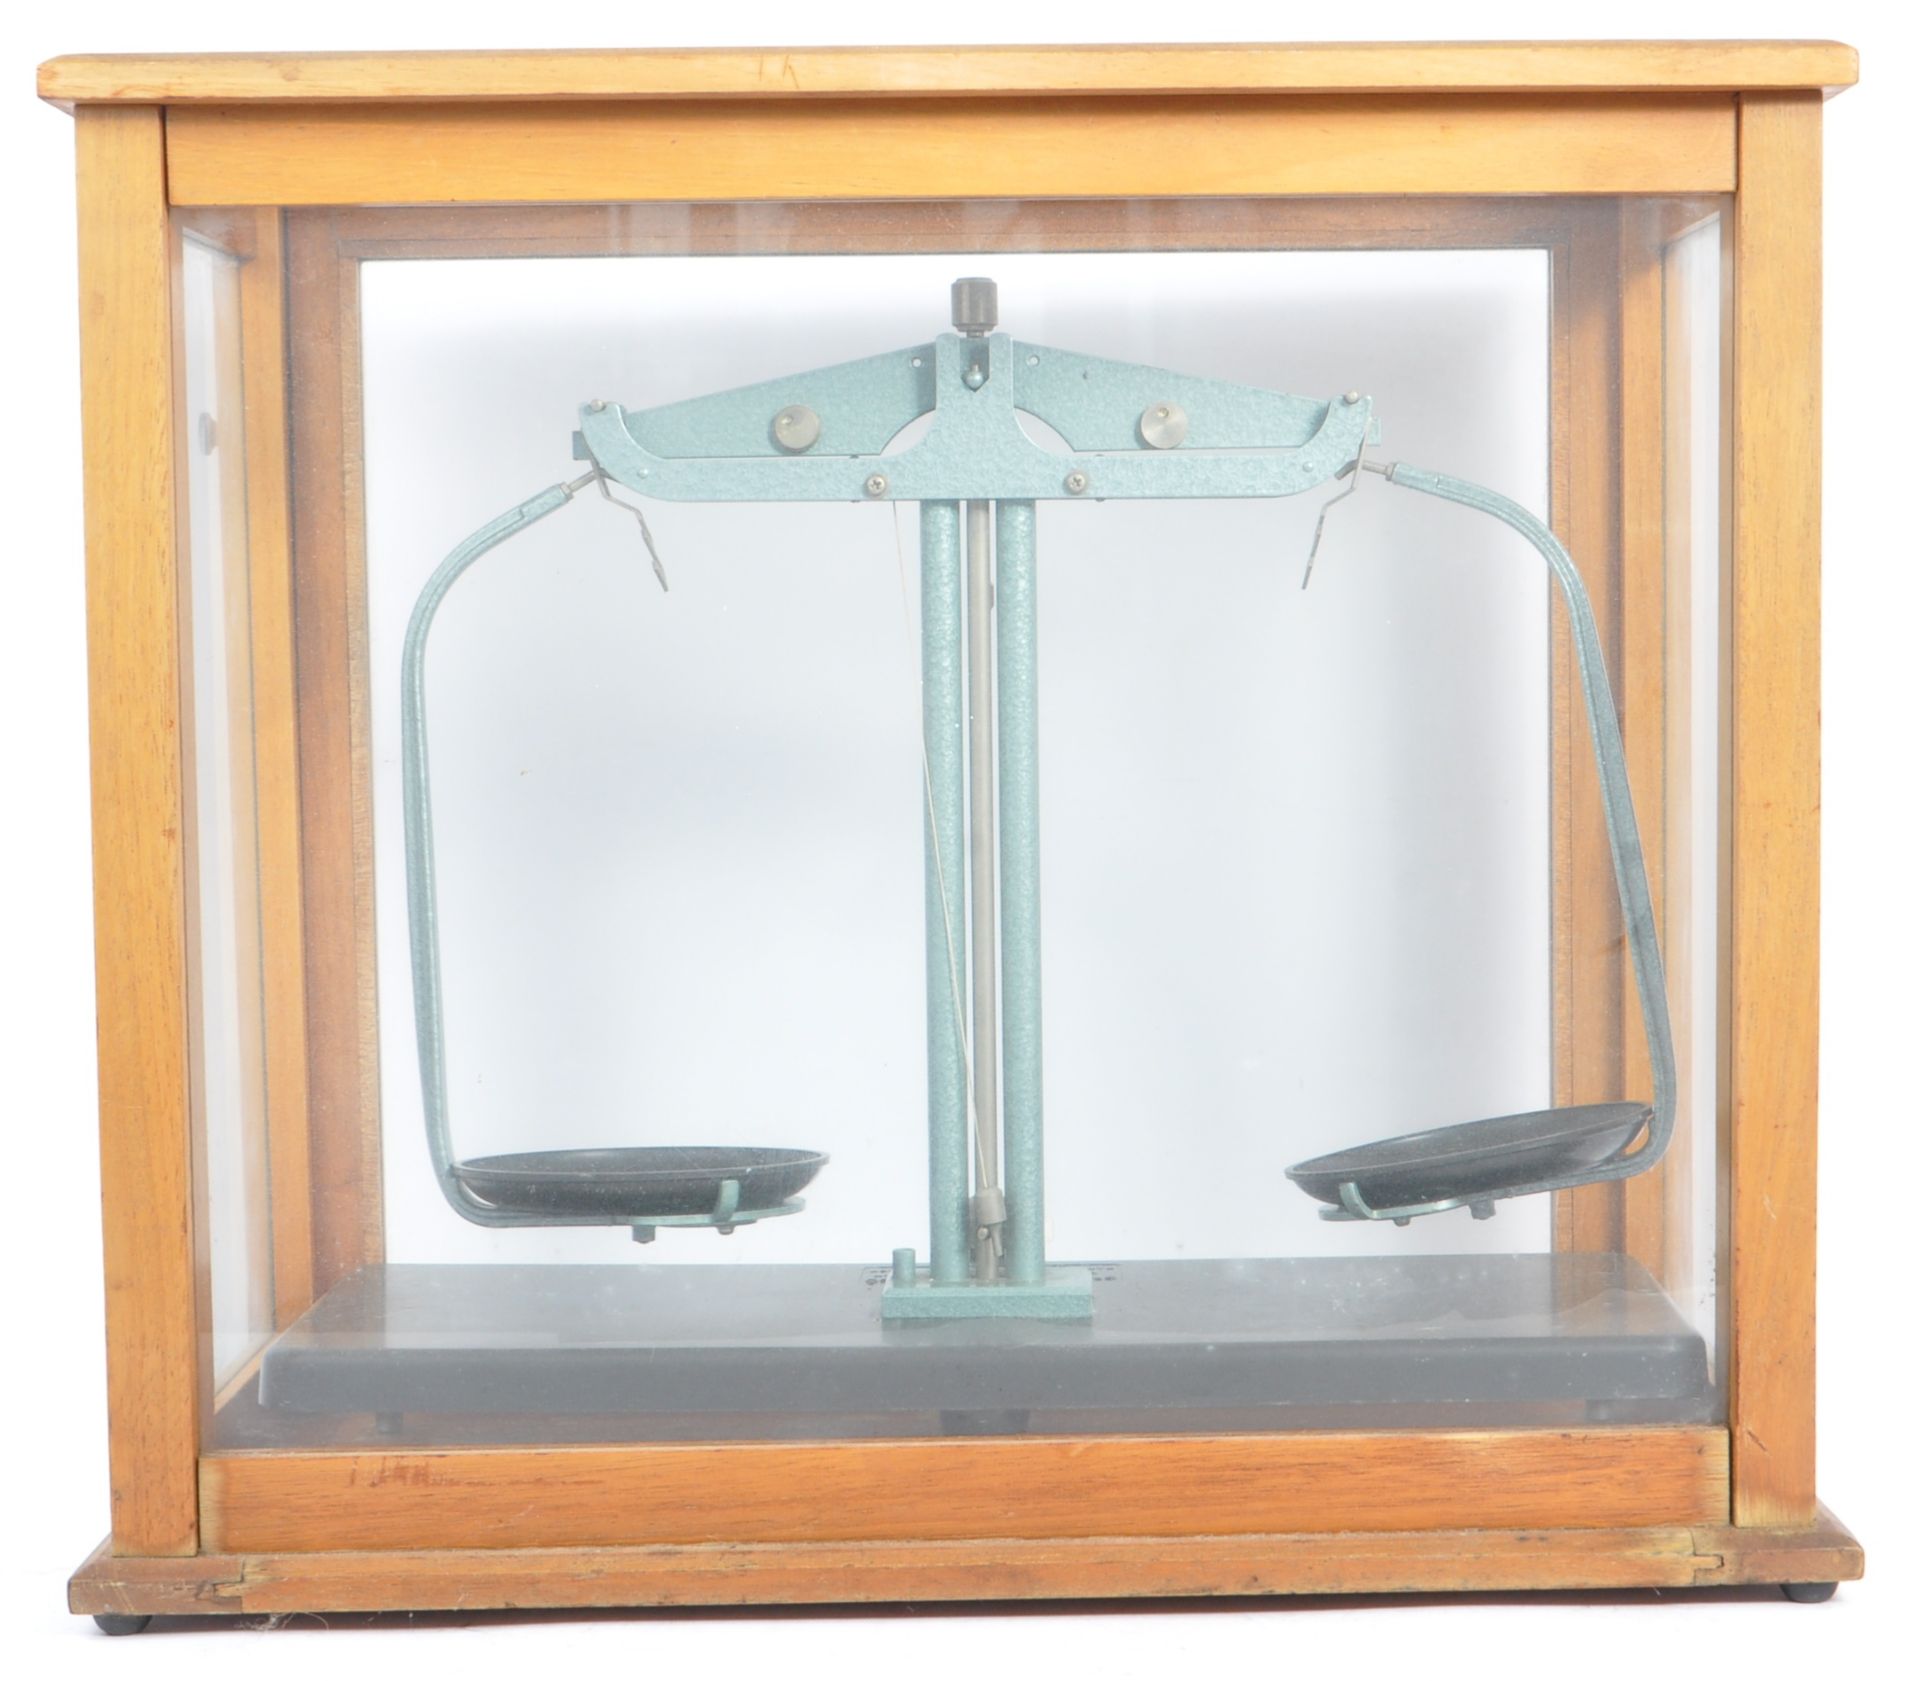 GRIFFIN & GEORGE OAK CASED SCIENTIFIC BALANCE SCALES - Image 4 of 7